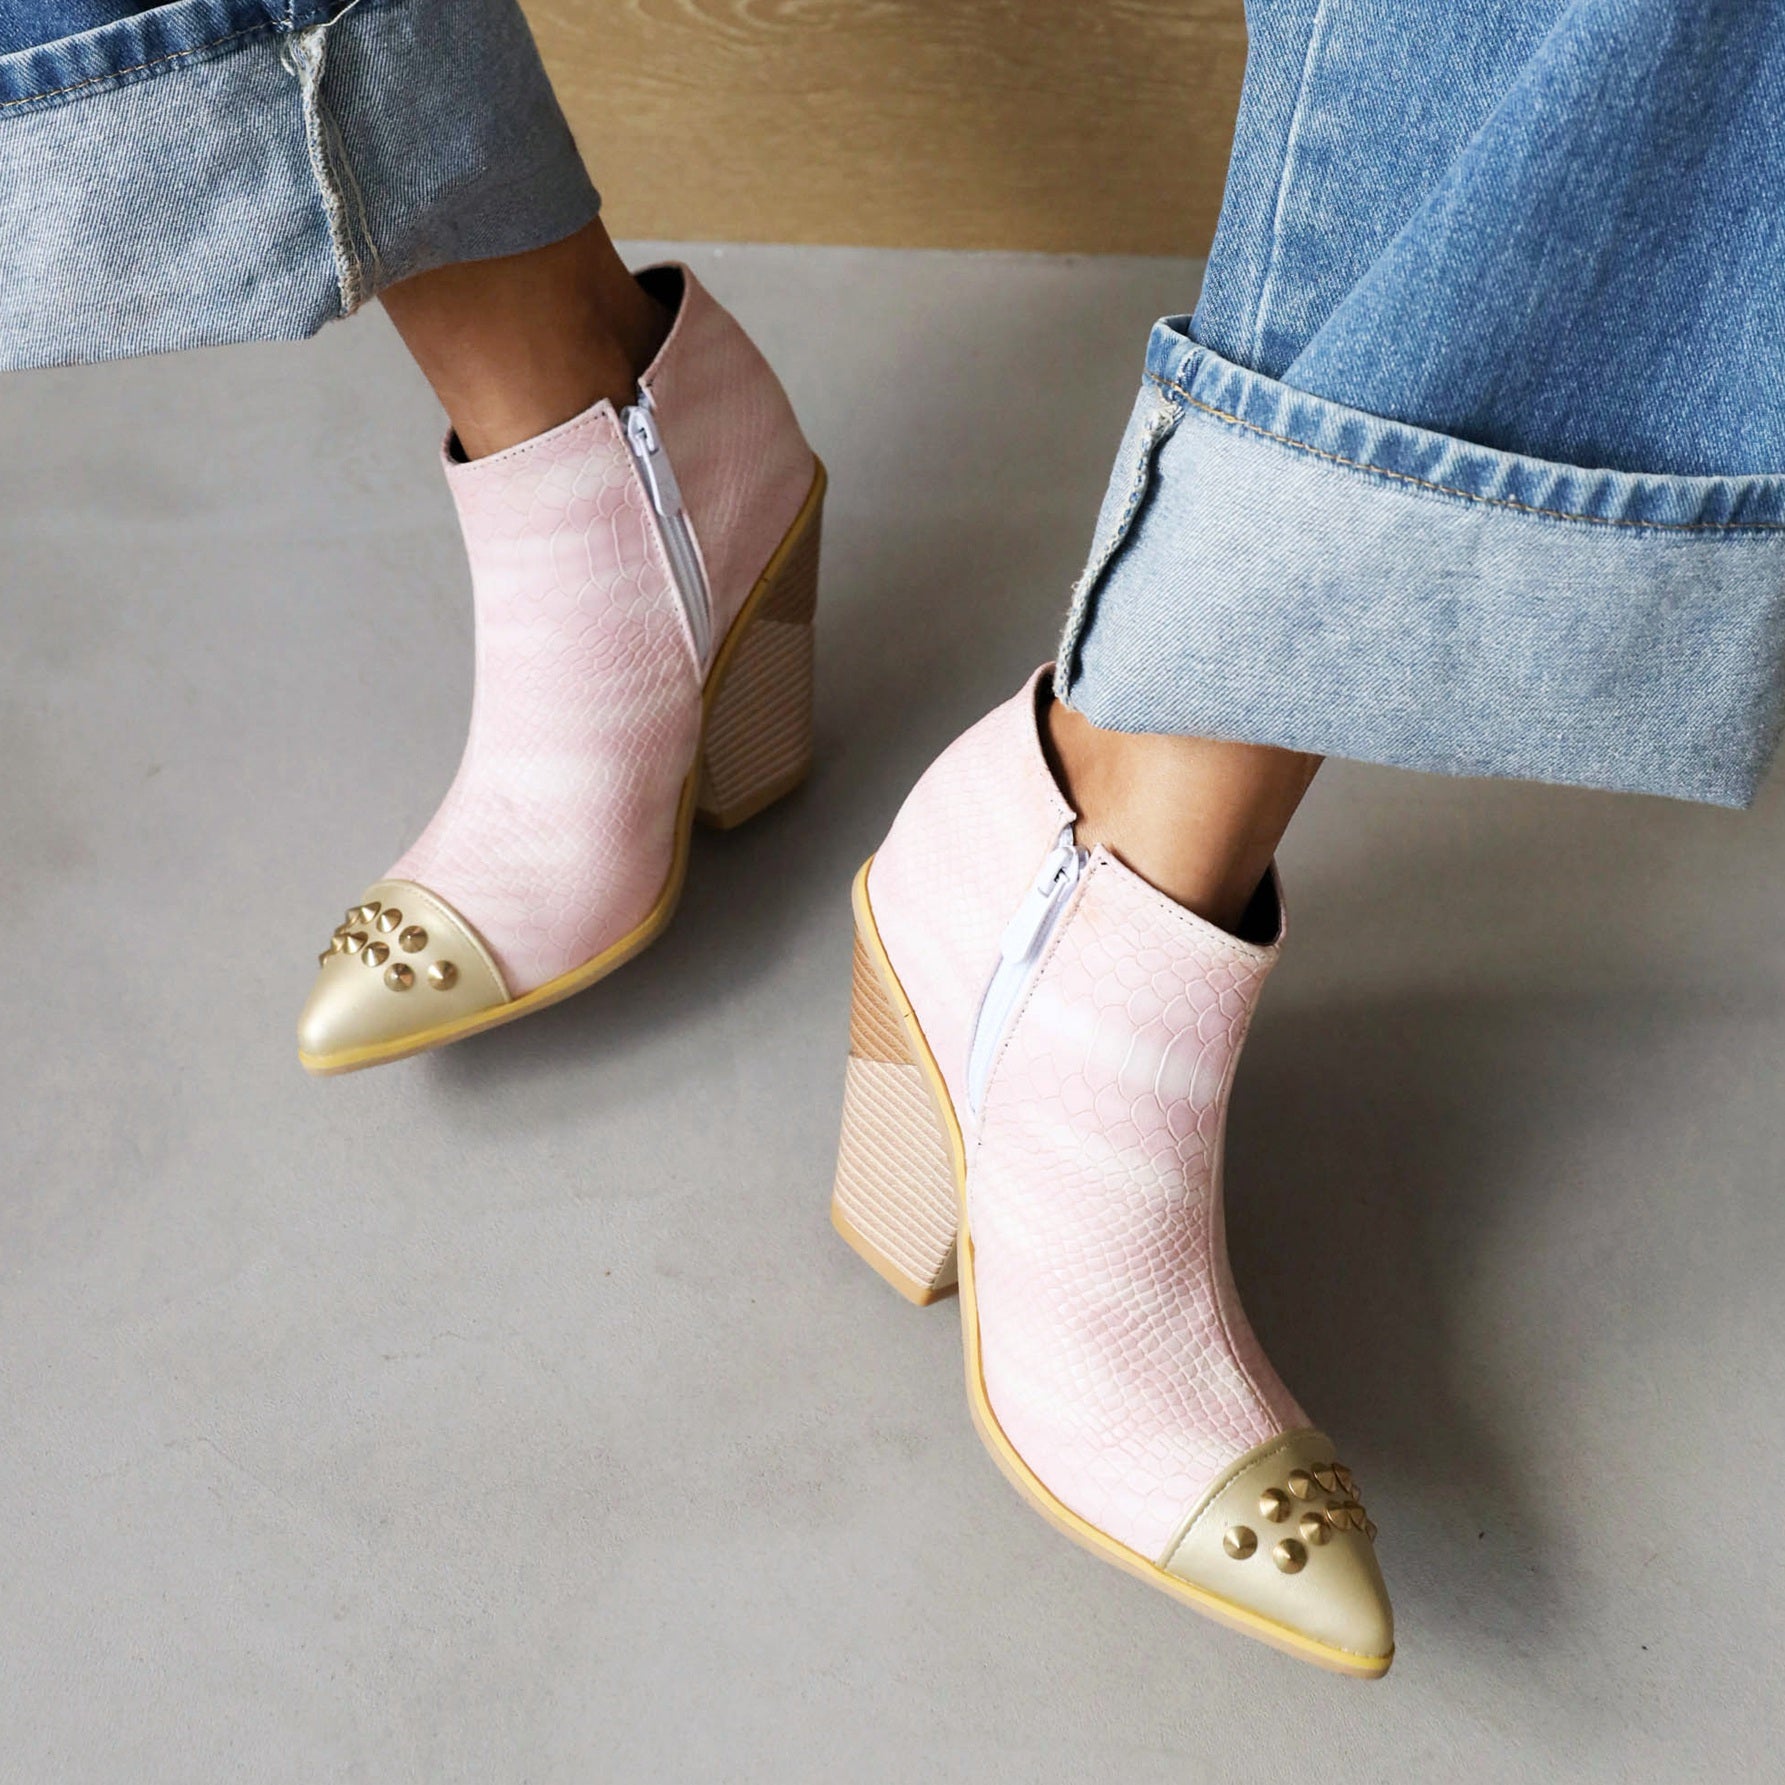 Bigsizeheels Trendy Chunky Heel Side Zipper Pointed Toe Casual Boots - Pink freeshipping - bigsizeheel®-size5-size15 -All Plus Sizes Available!